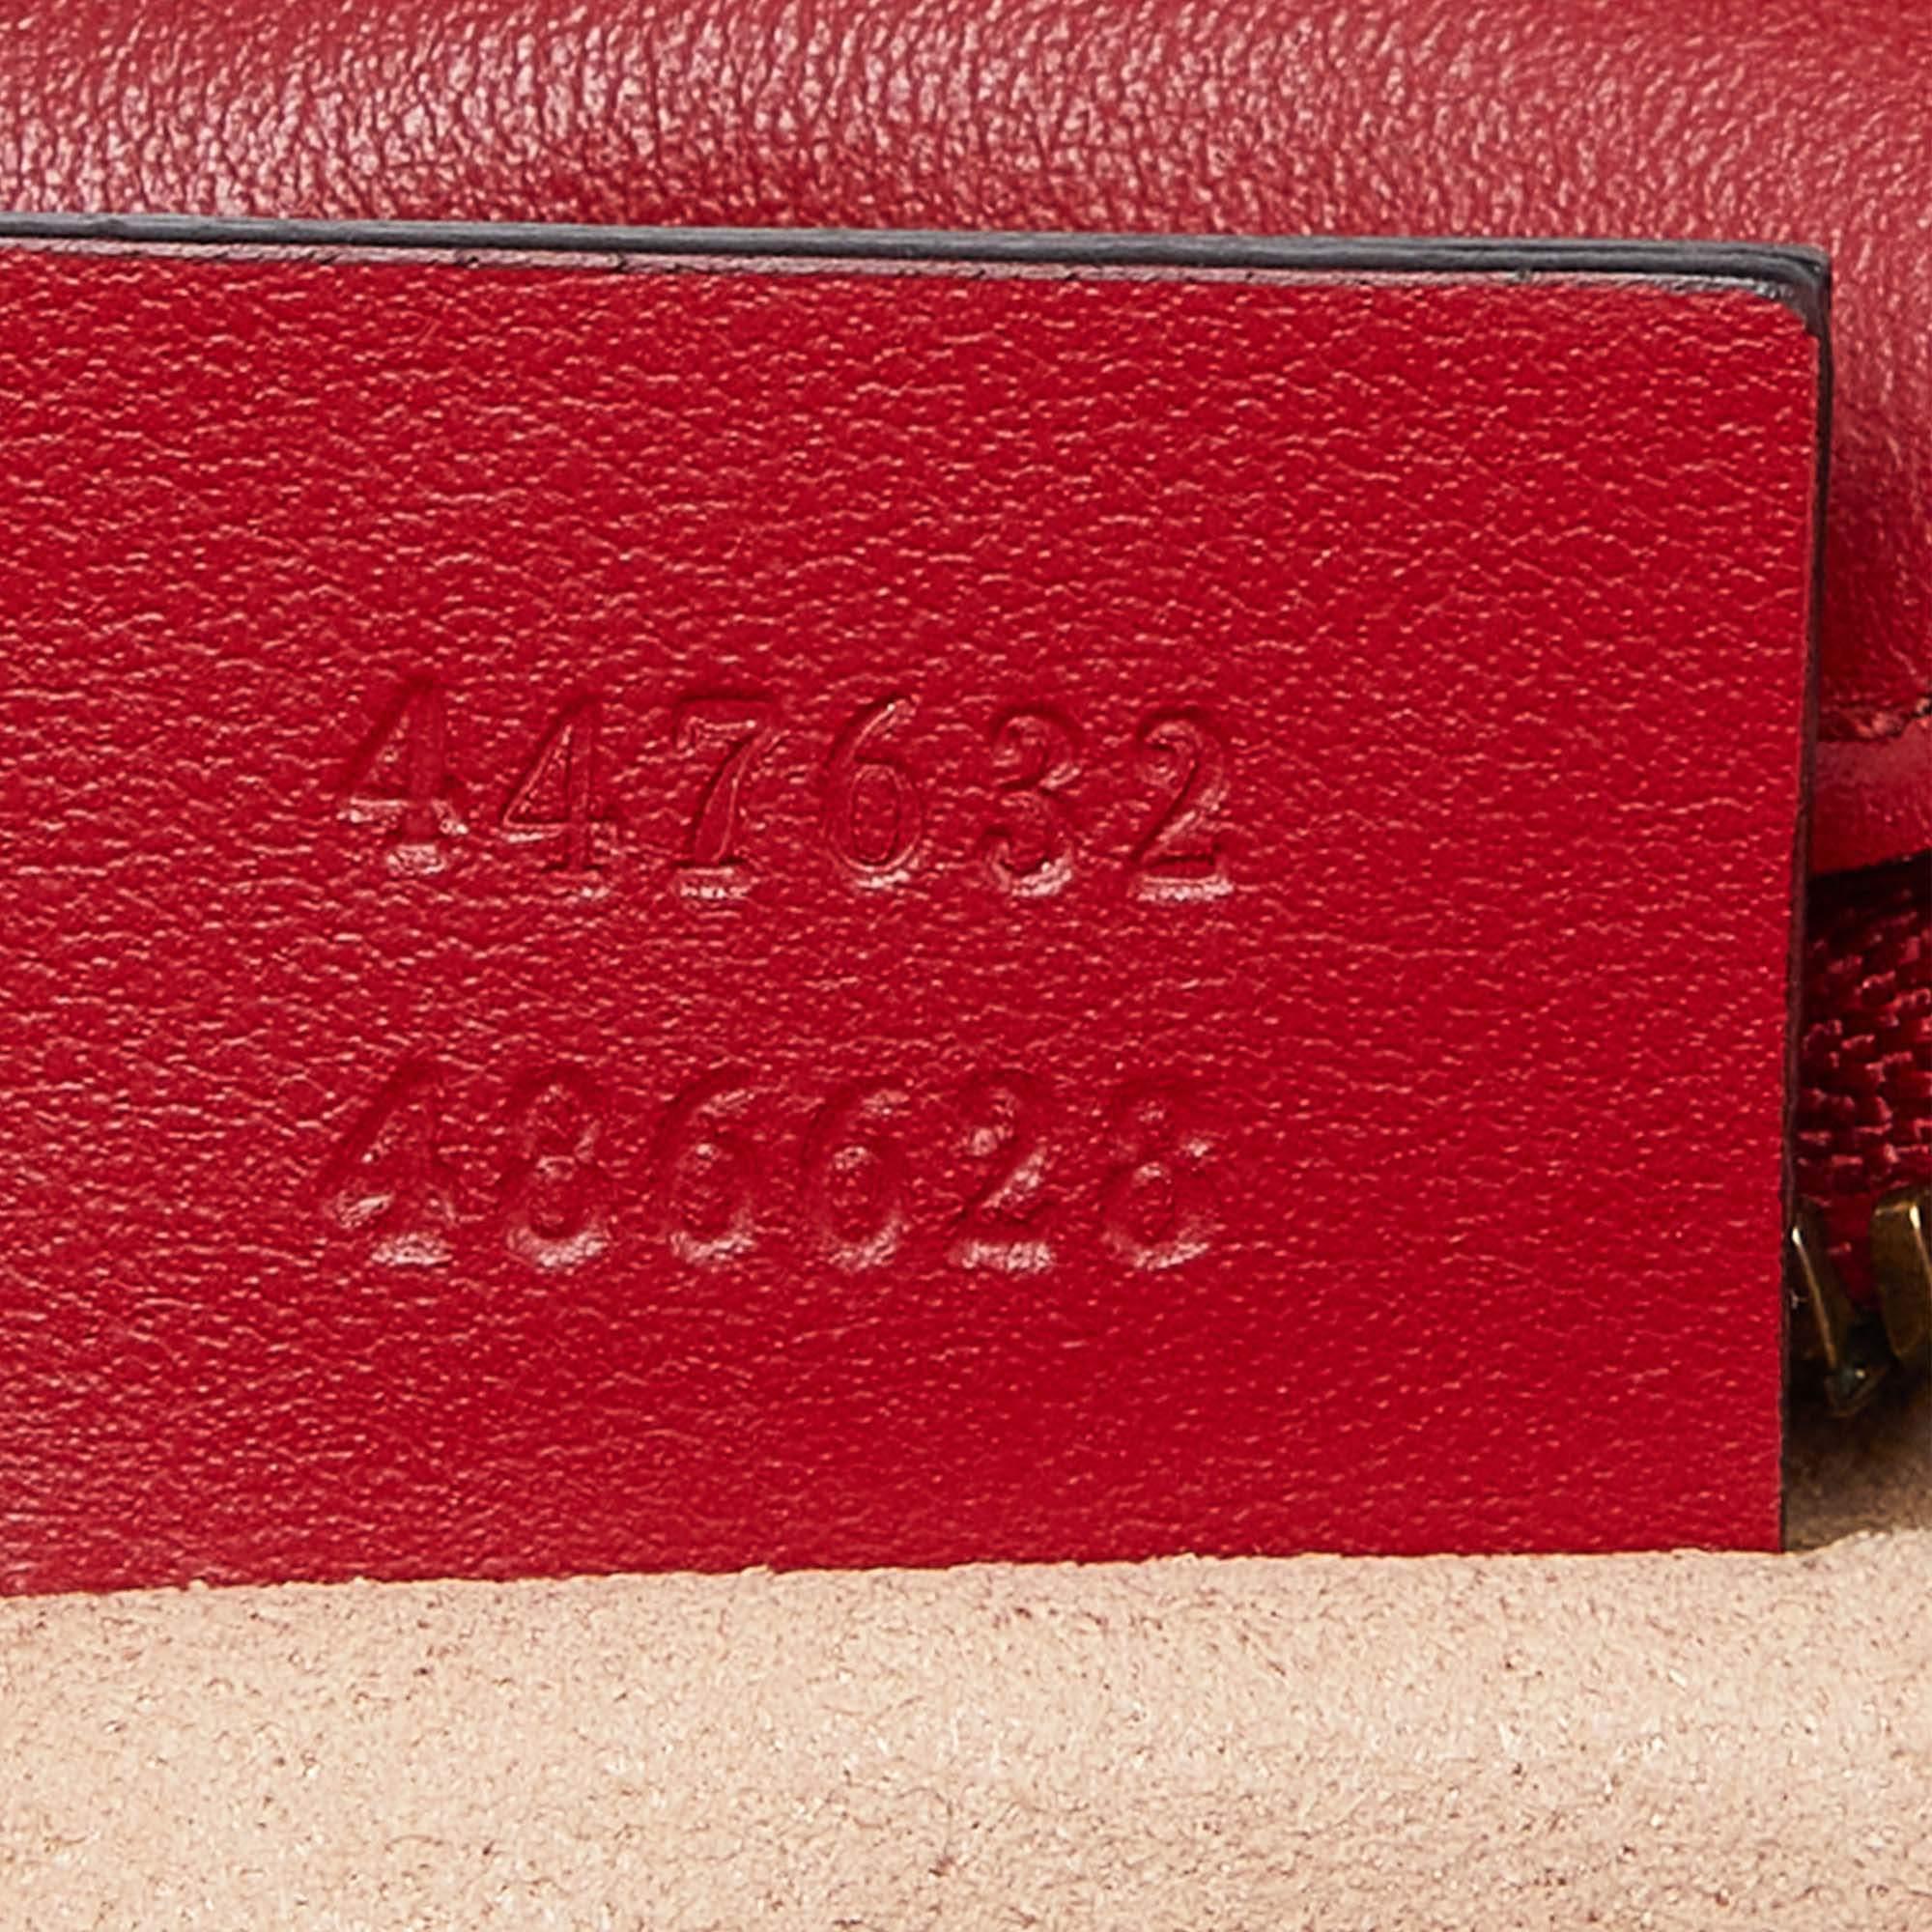 Gucci Red Matelassé Leather Small GG Marmont Shoulder Bag For Sale 6